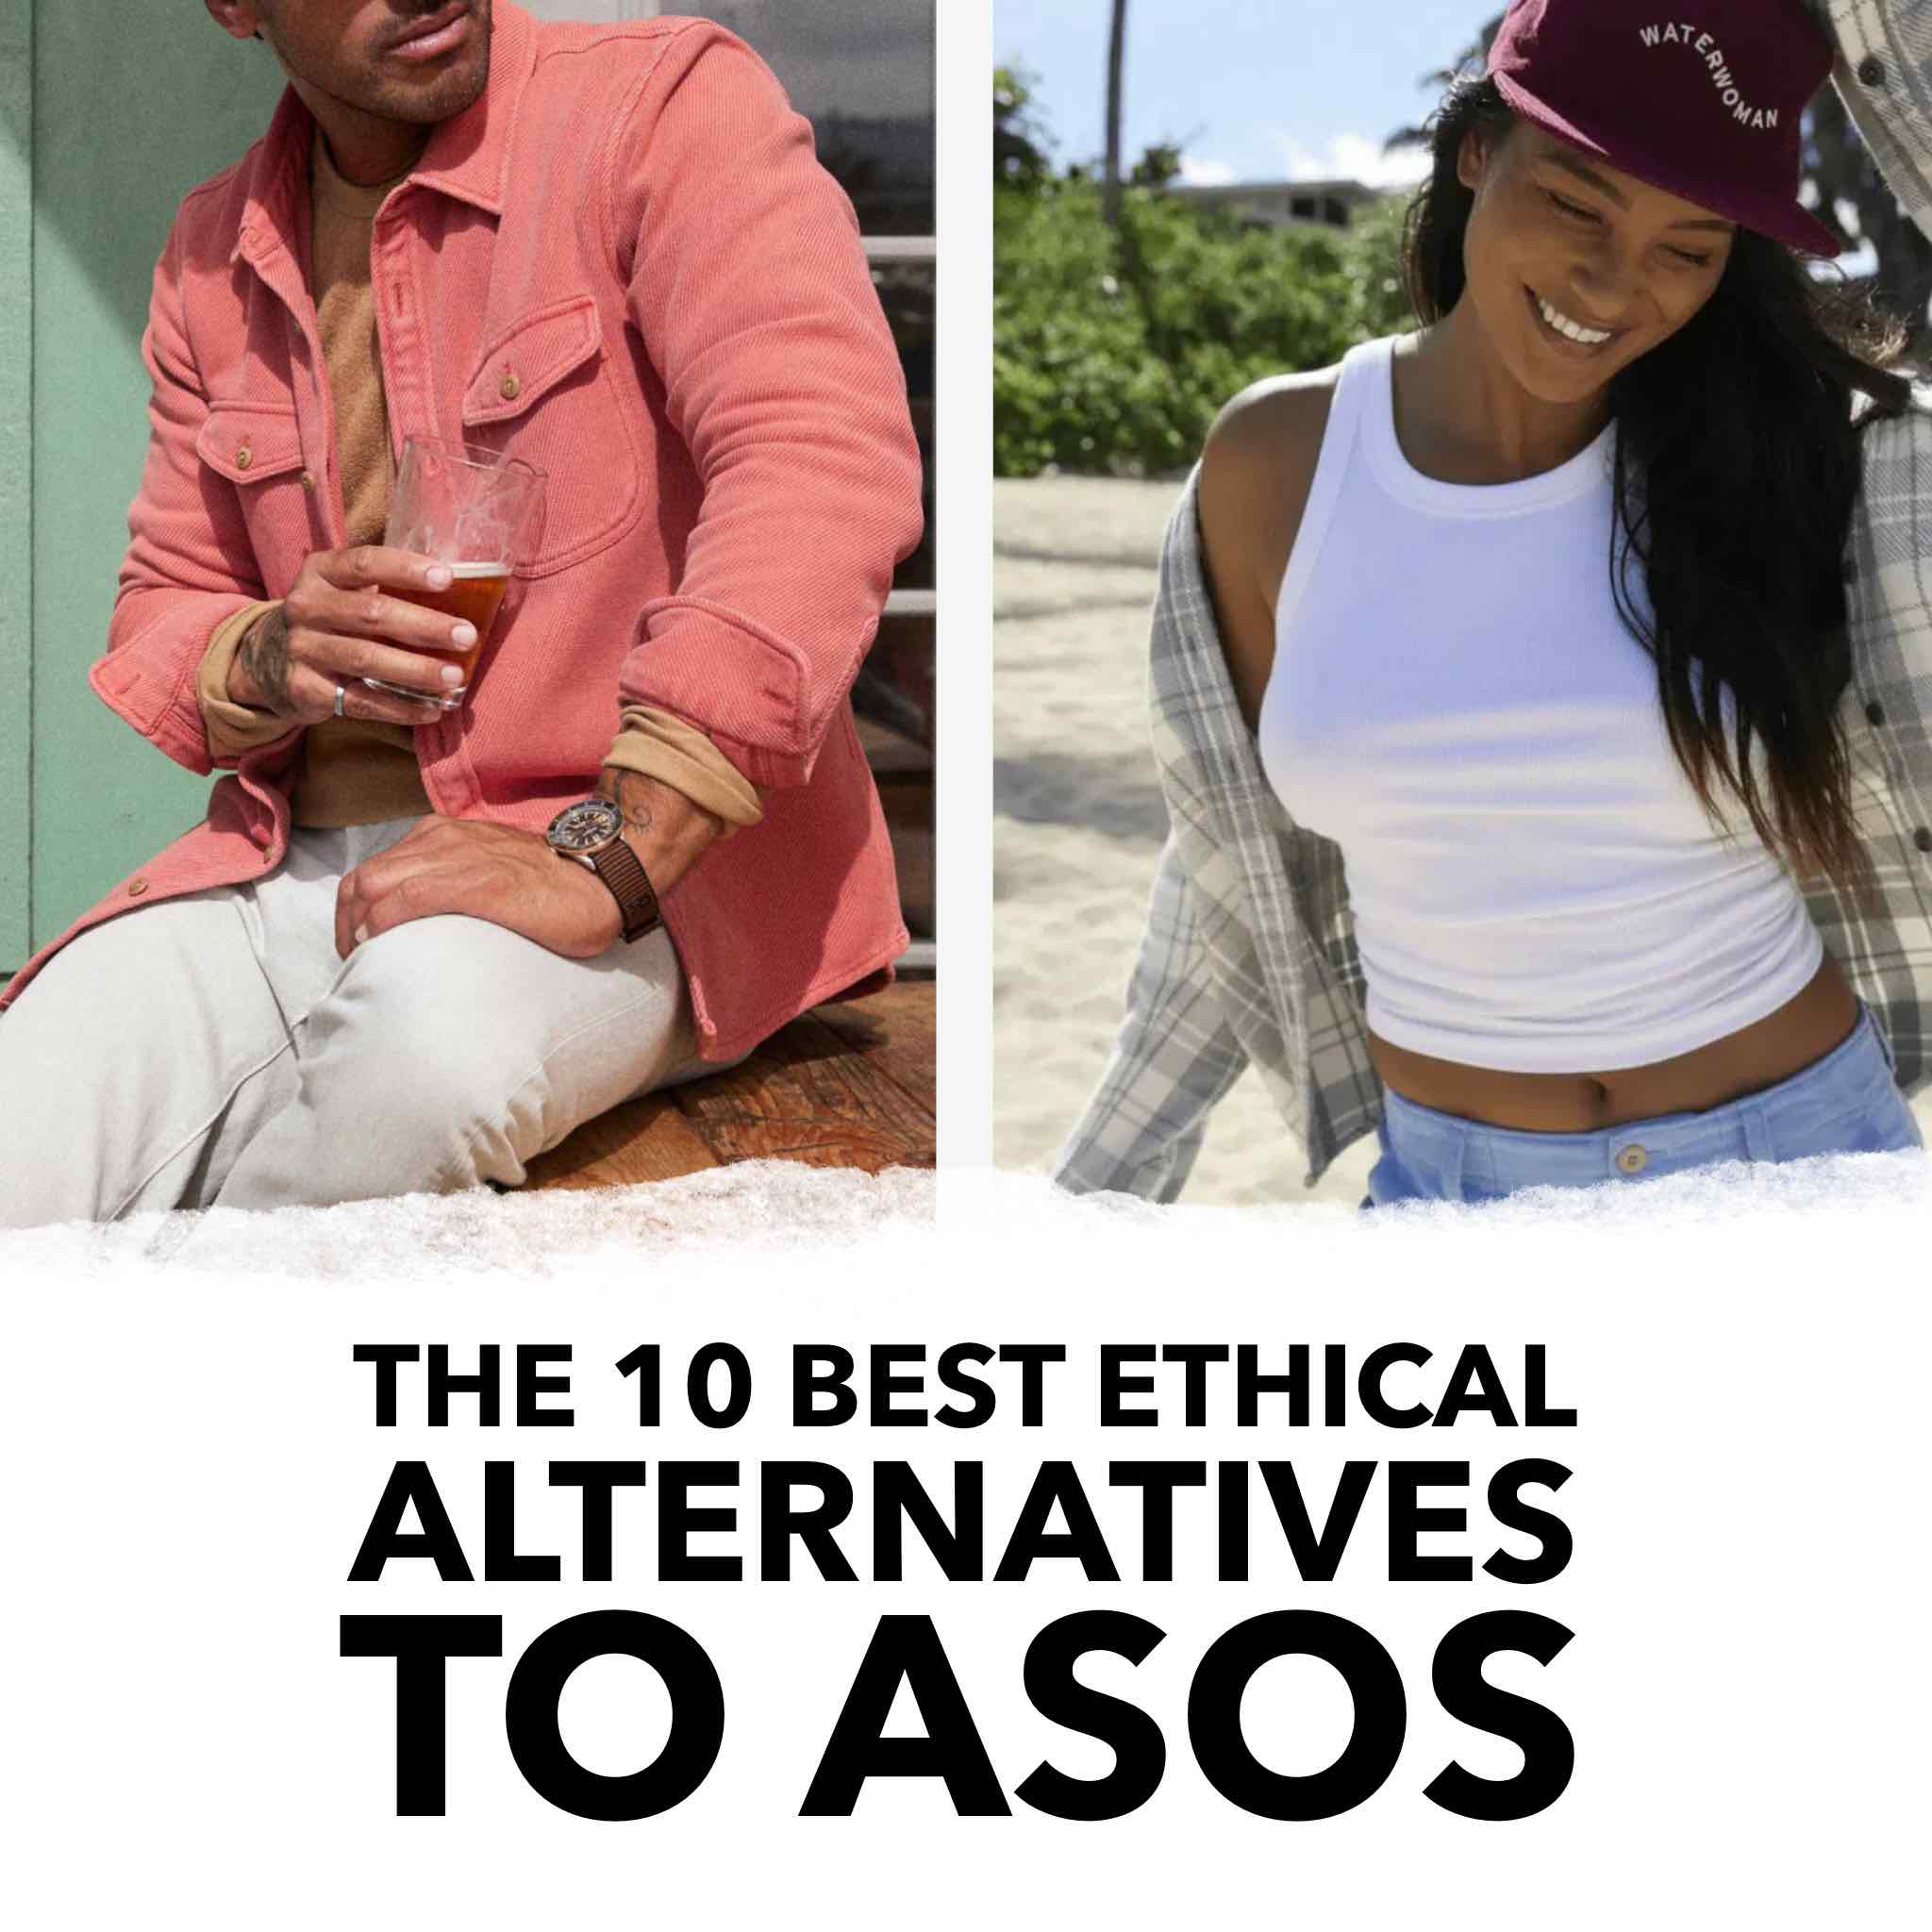 The 10 Best Ethical Alternatives to ASOS